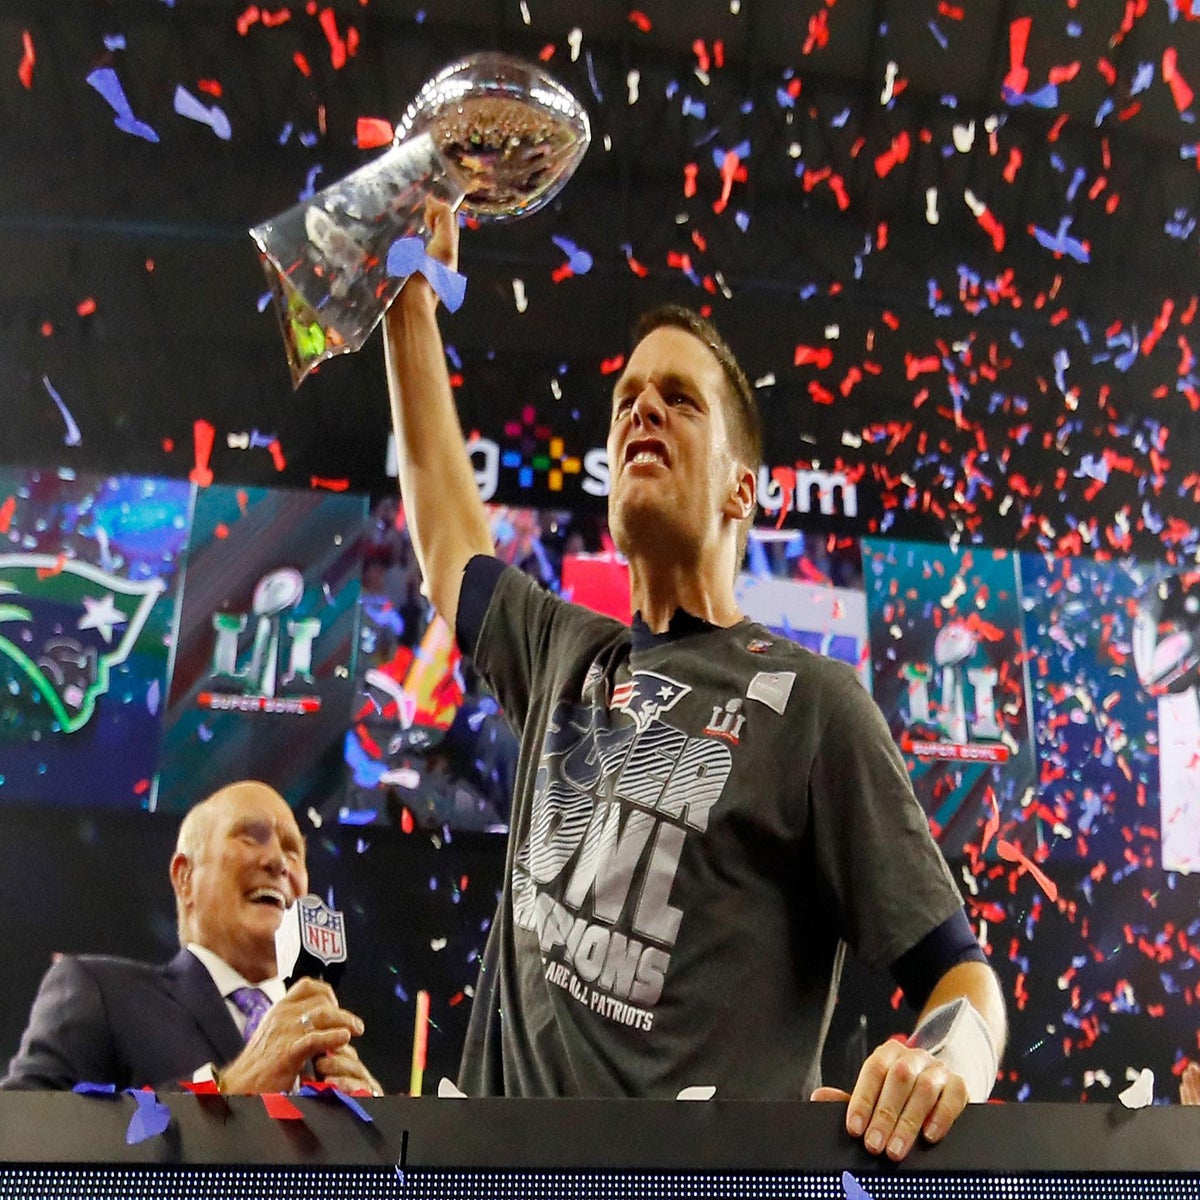 5 things we learned from Patriots' Super Bowl 53 win